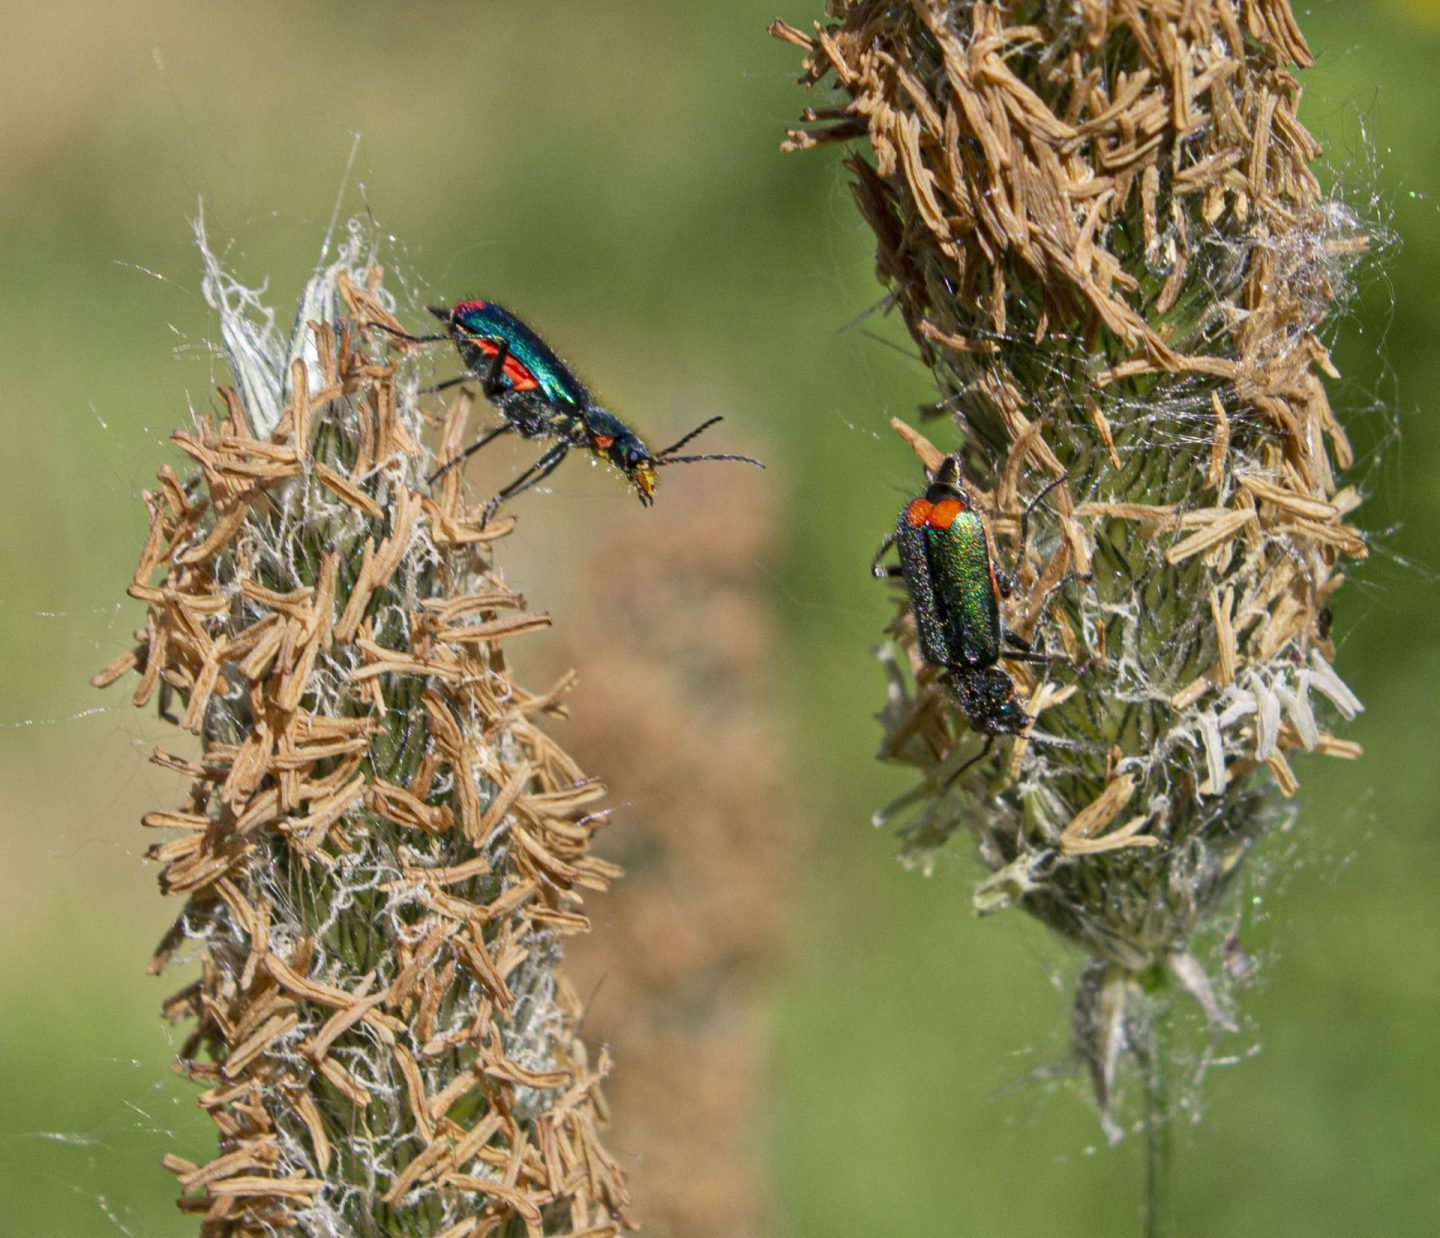 Two beetles climbing over a plant